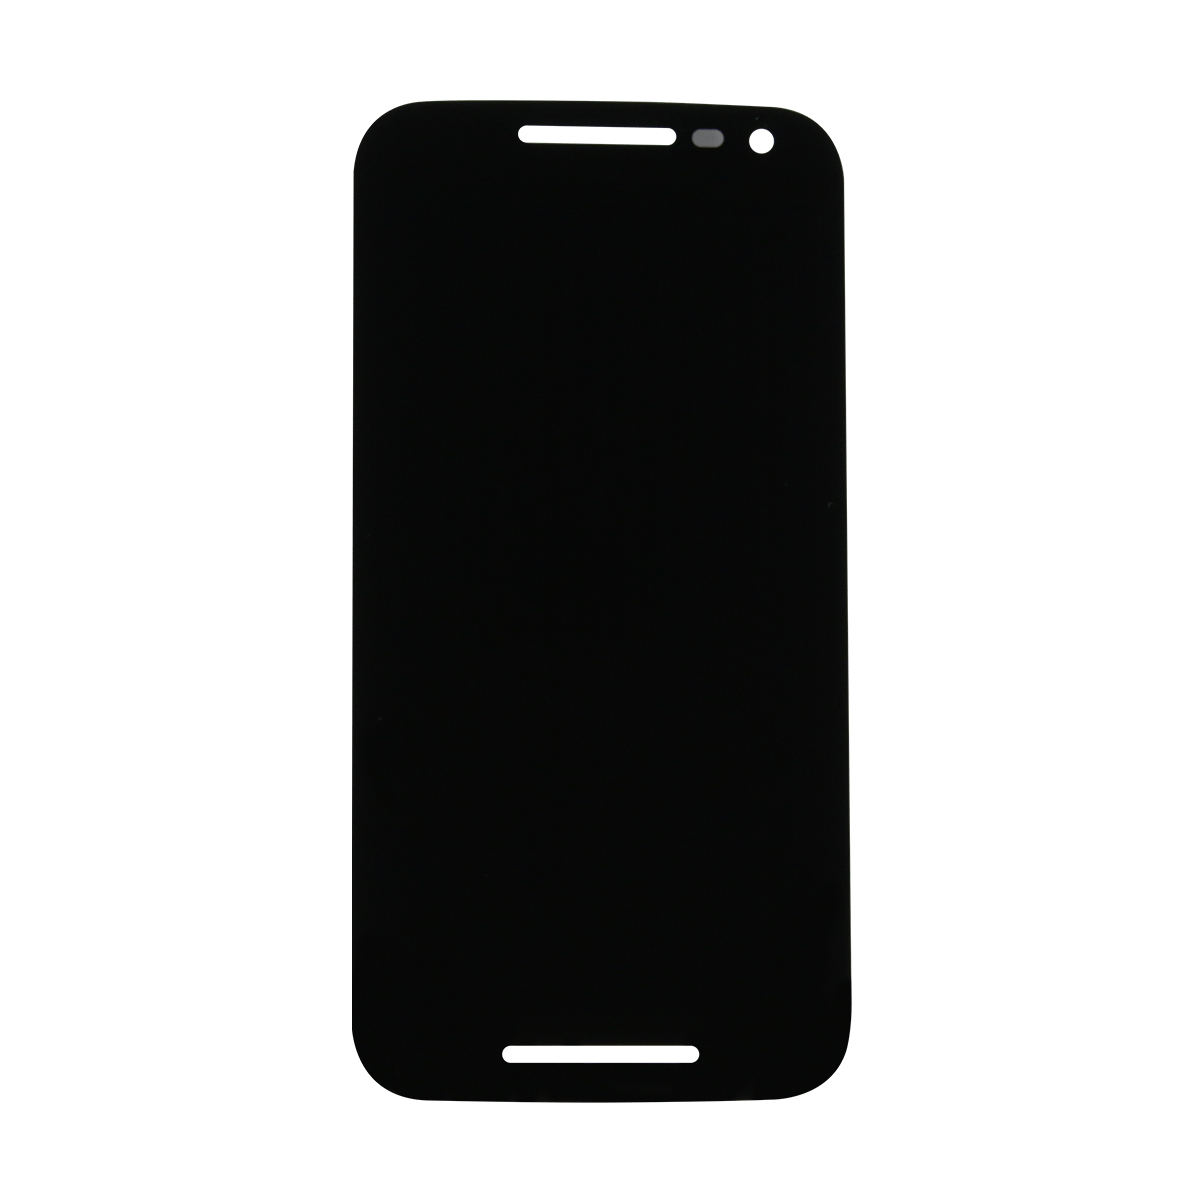 Moto G 3rd Gen and Touch Replacement – Universe